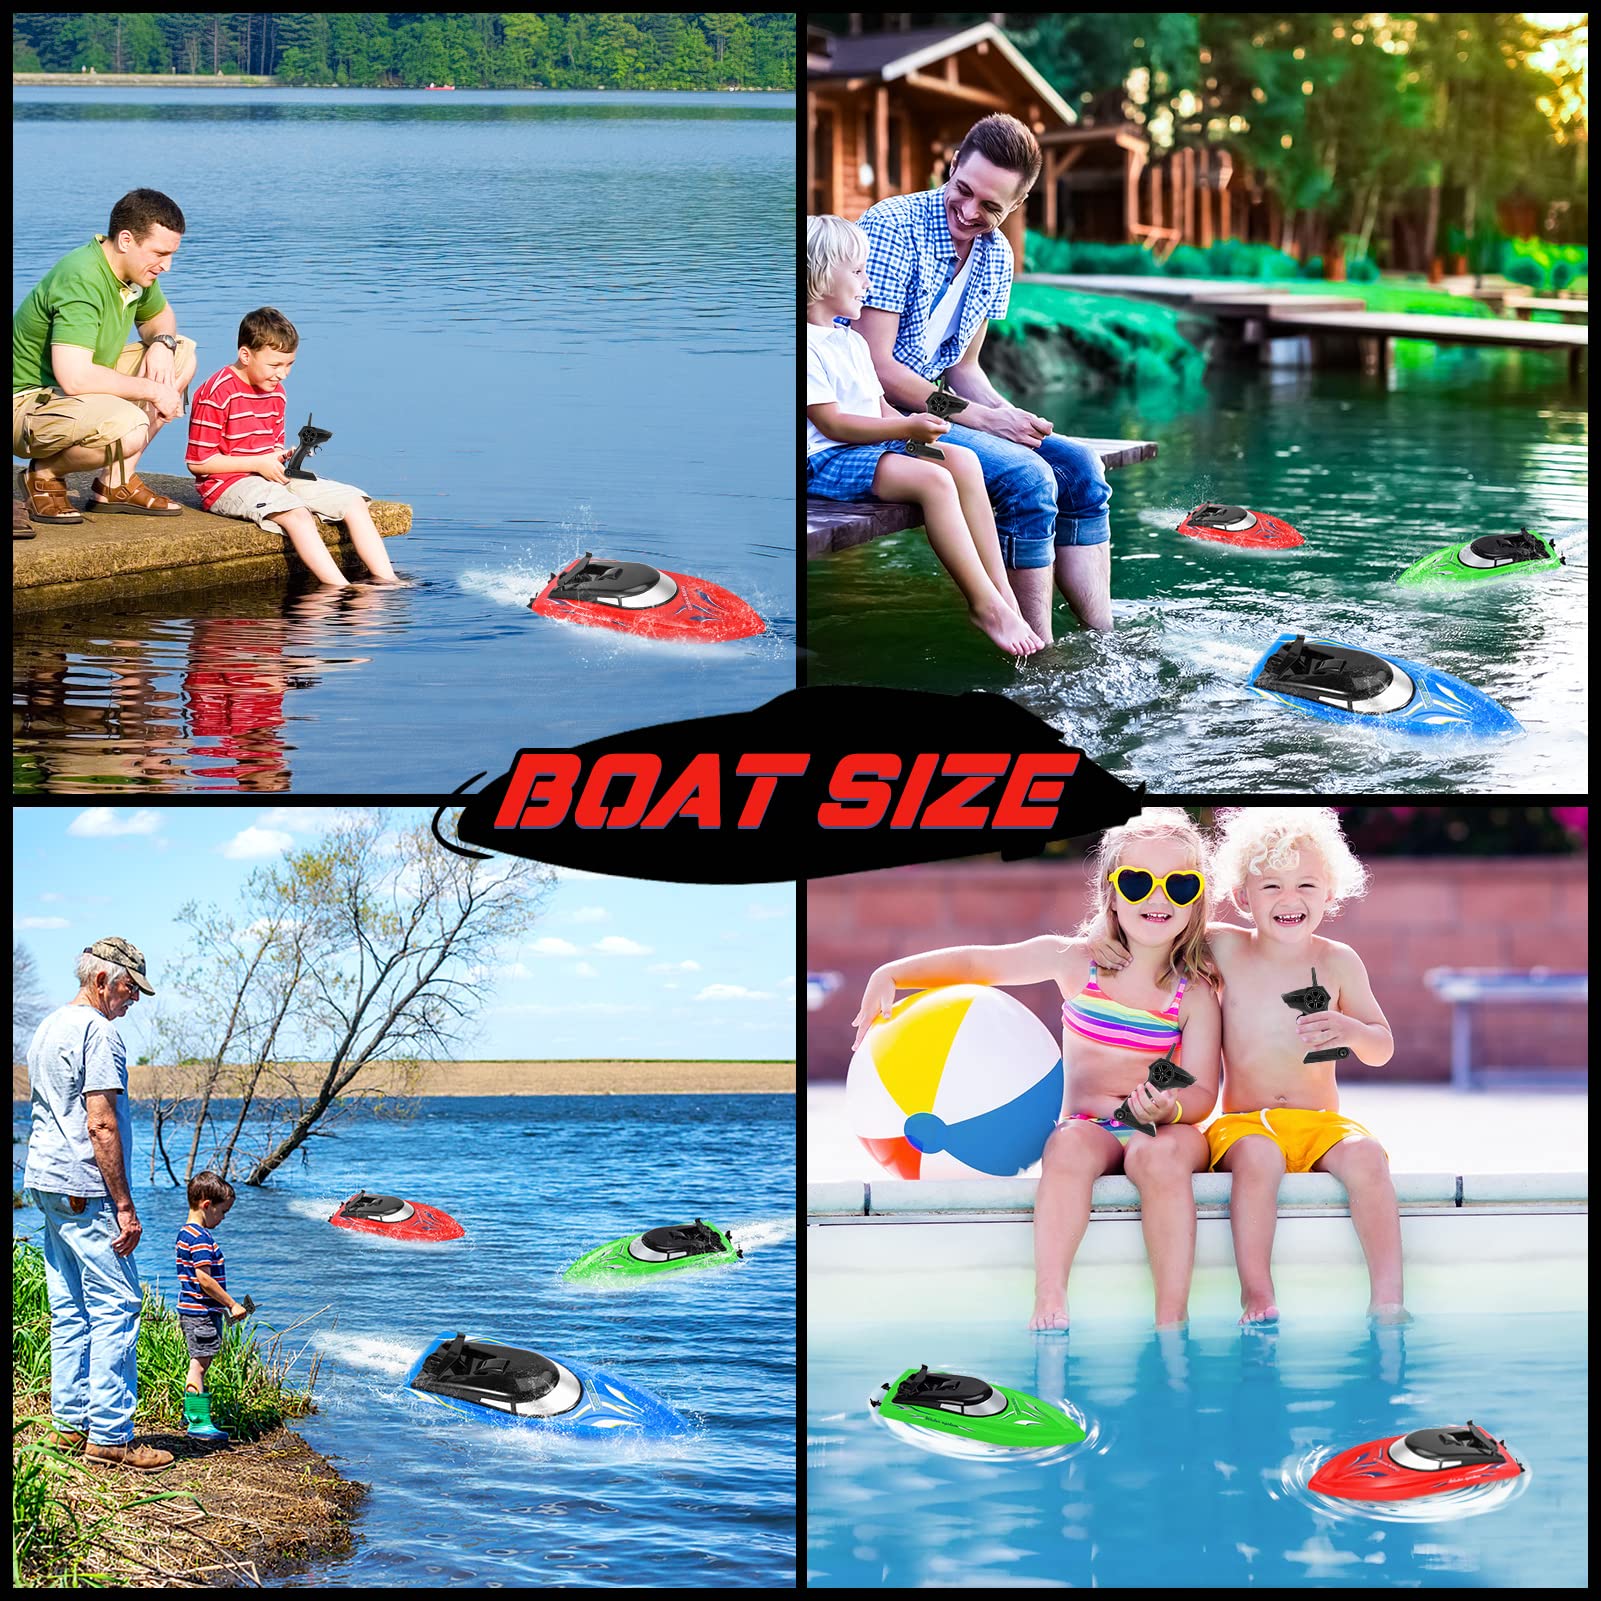 LIZHOUMIL 3PACK RC Boat, Remote Control Boats for Kids and Adults,10km/H 2.4G High Speed Remote Control Boat, Fast RC Boats for Pools and Lakes with 6 Rechargeable Battery